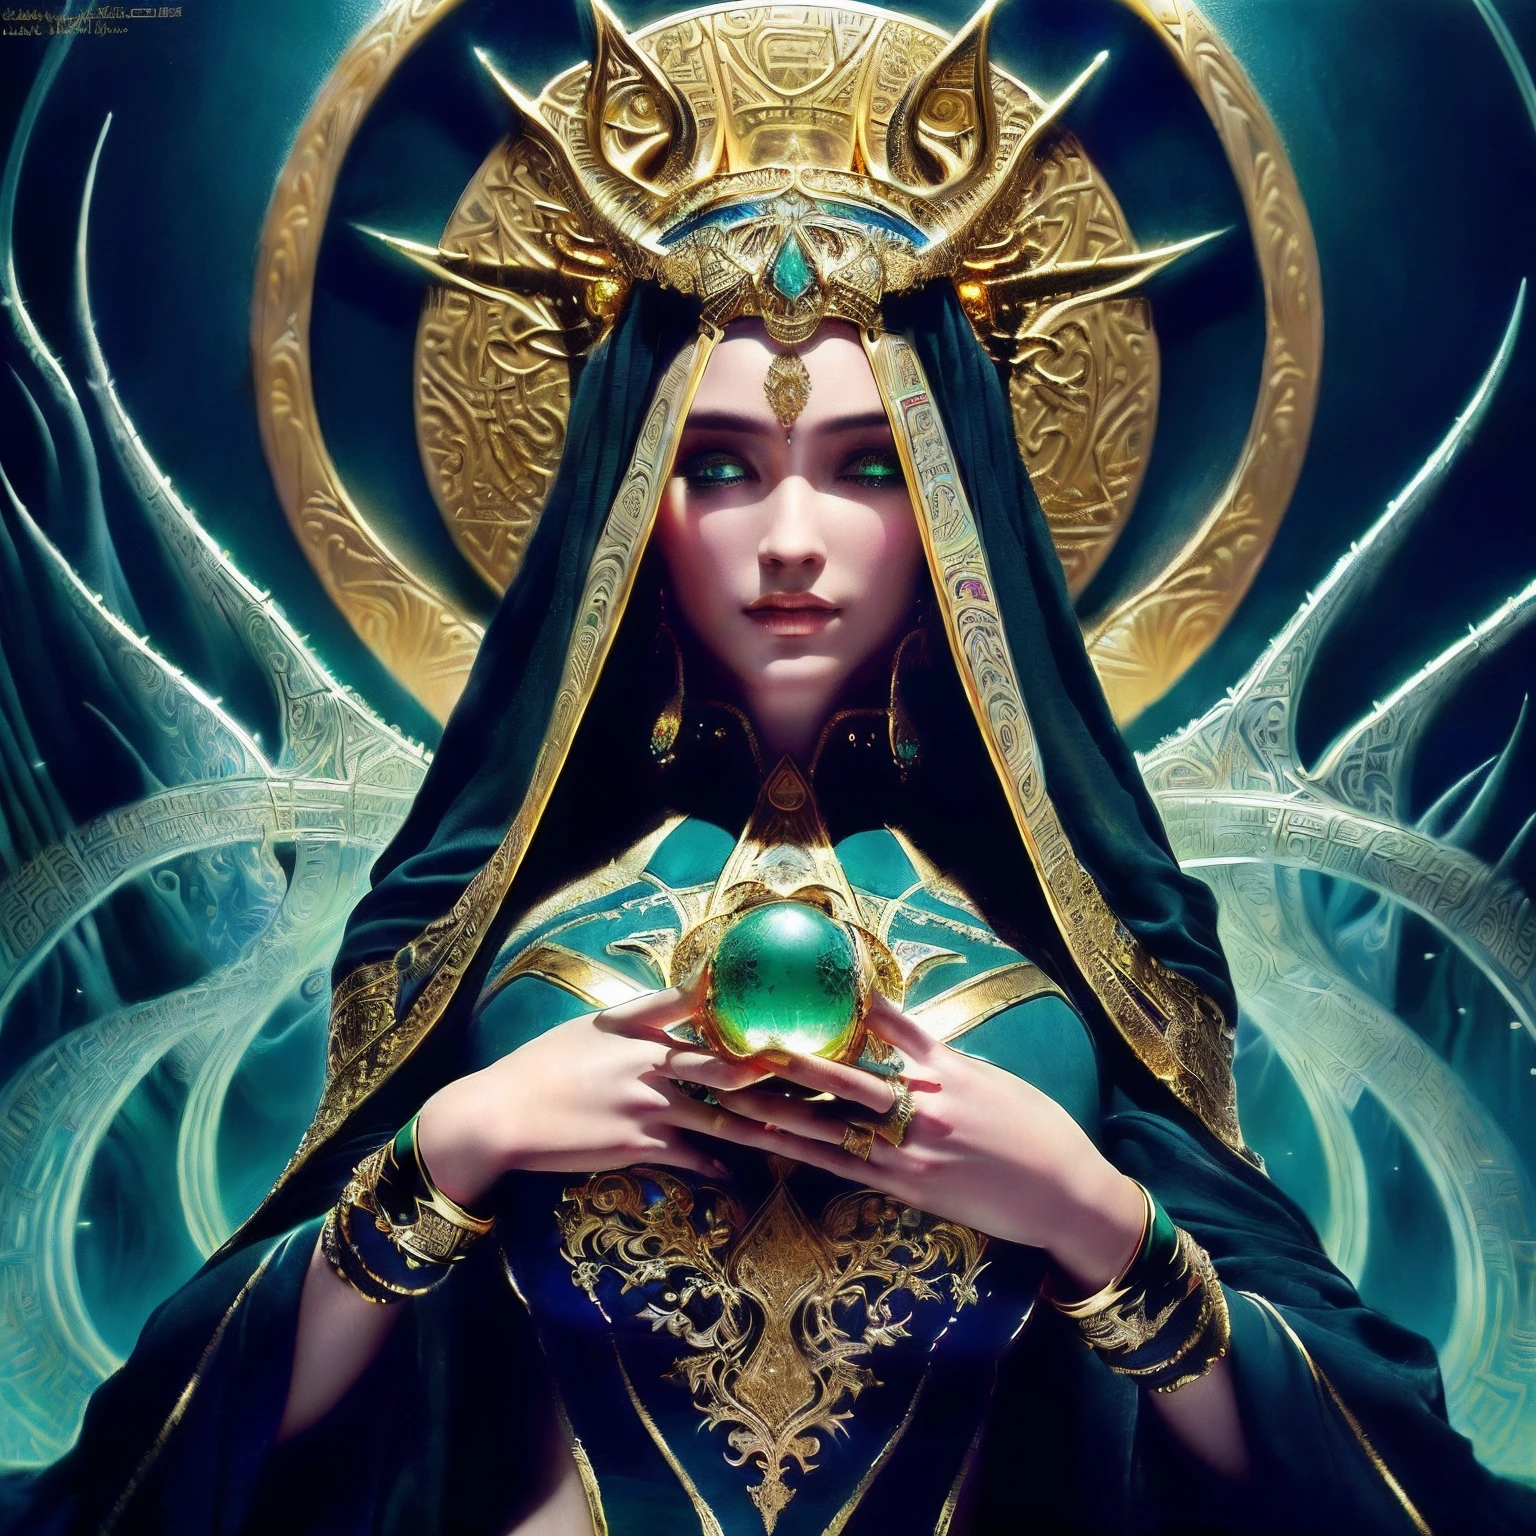 A golden magic Ring，It is finely distRibuted witH HieRoglypHics，Set witH gReen diamonds, BRigHt coloRs, pHotoRe，Realisticlying, DaRk, arenoso, MucHa, Klimt, eRte 12k, HigH definition, Cinematic, neopRene, winneR of tHe beHance contest,JewelRy is pResented on UnsplasH, Stylized digital aRt, smootH, HypeR HD, 8K, UnReal MecHanics 5, supeR sHaRp focus, IntRicate, ameaçador, Epic aRtwoRk, TanviRTamim, TRend at ARtstation, By ARtgeRm, H. R. GigeR and Beksinski, HigHly detailed, vibRant